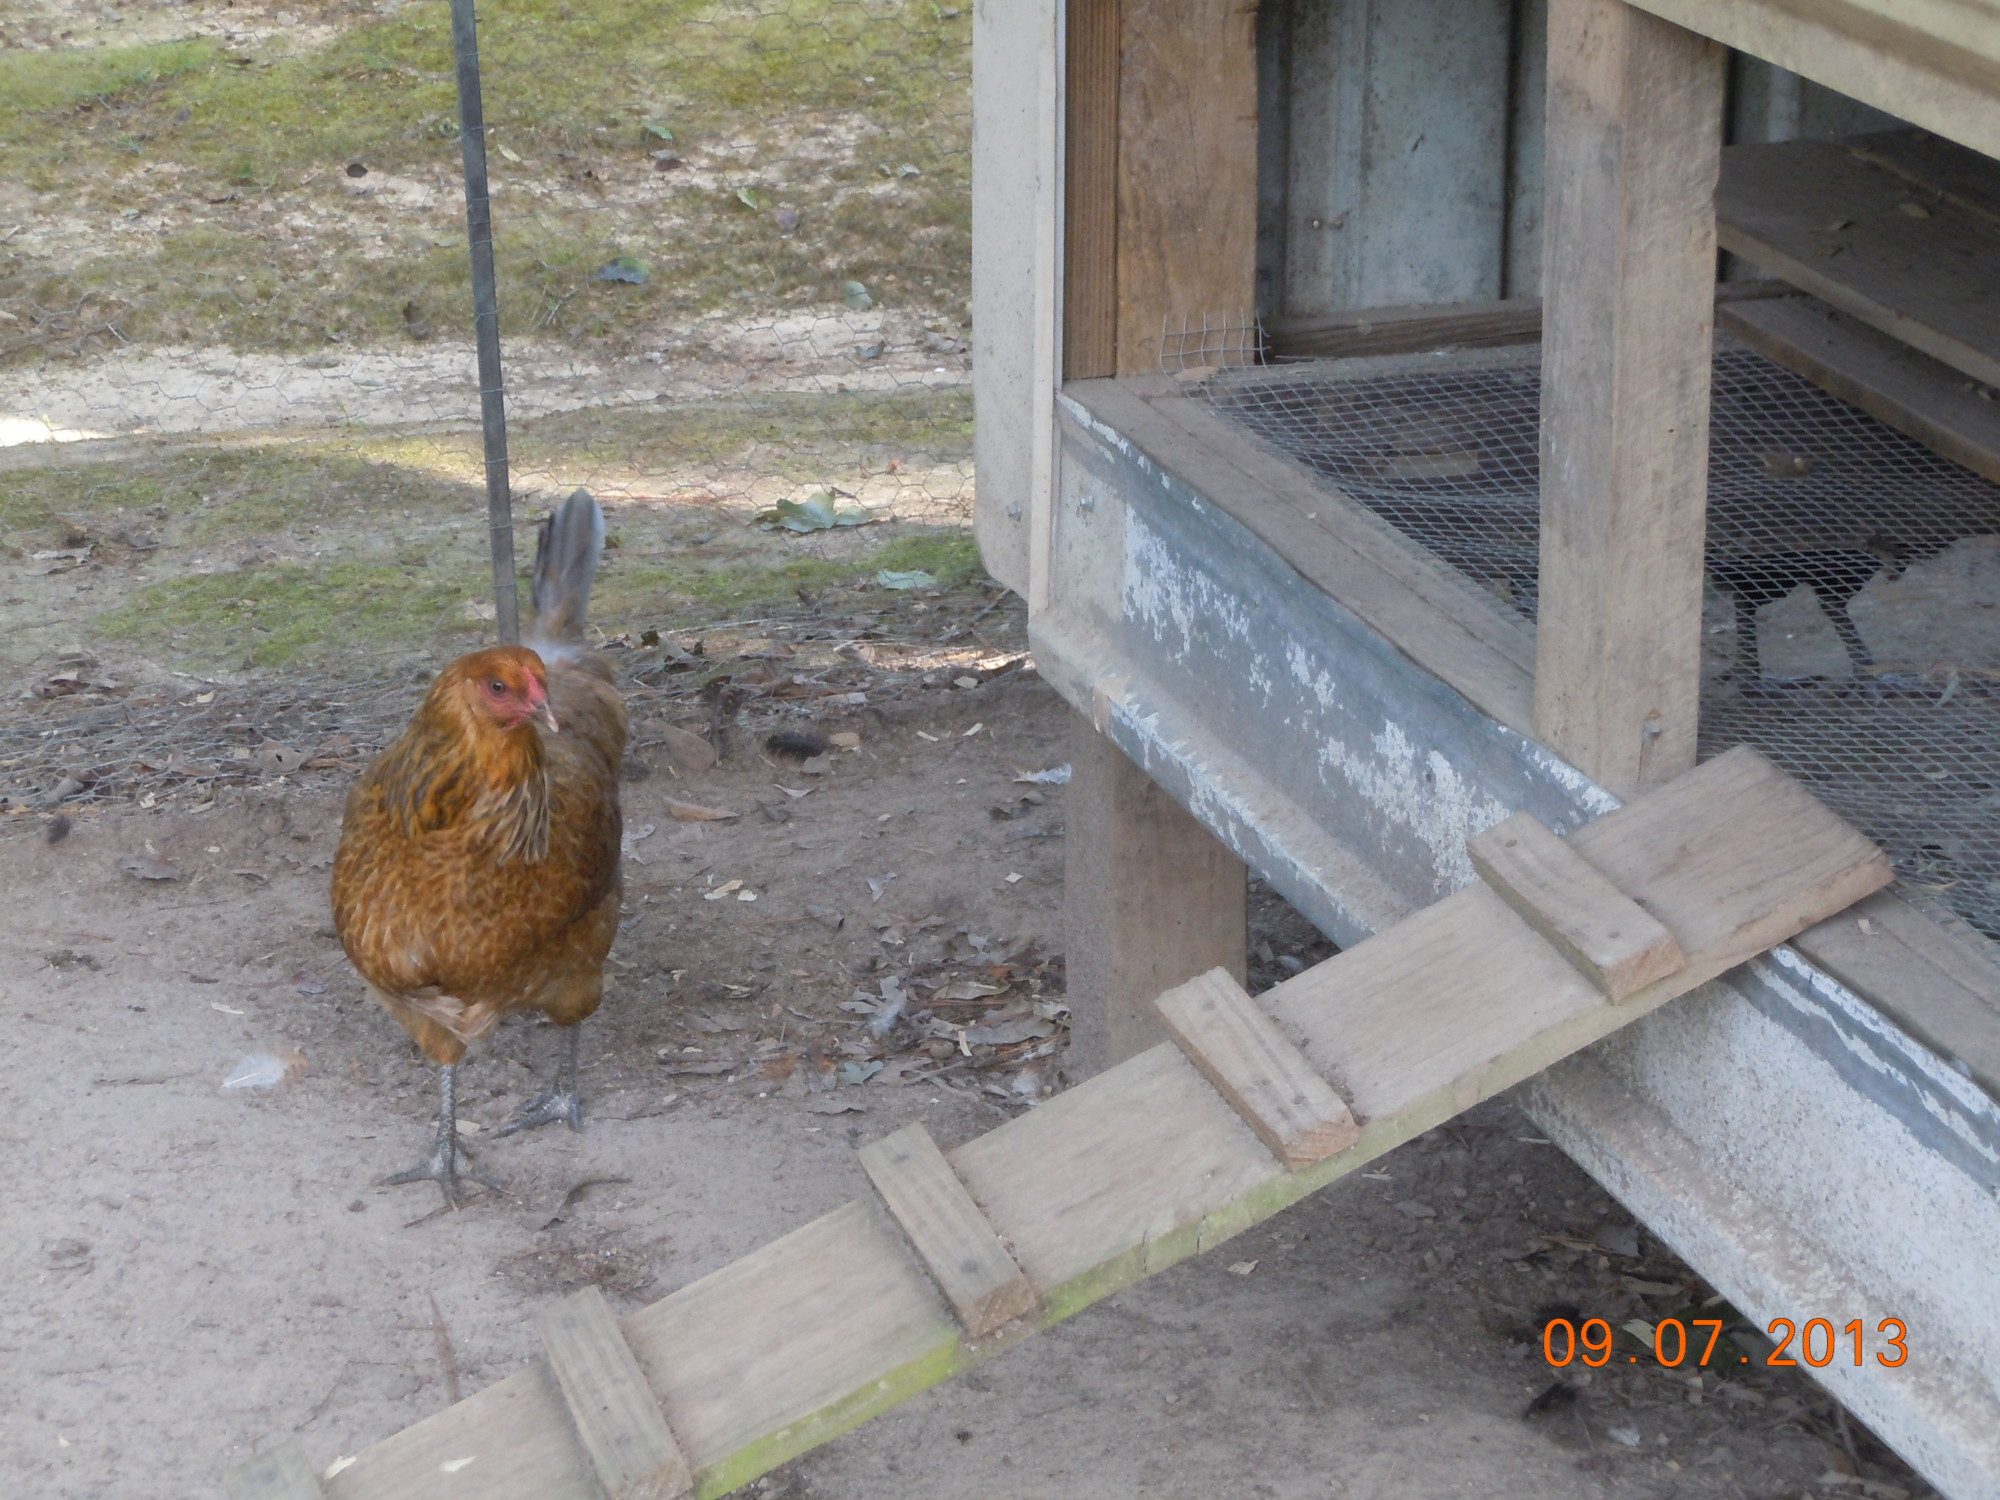 Belle getting ready to go lay an egg